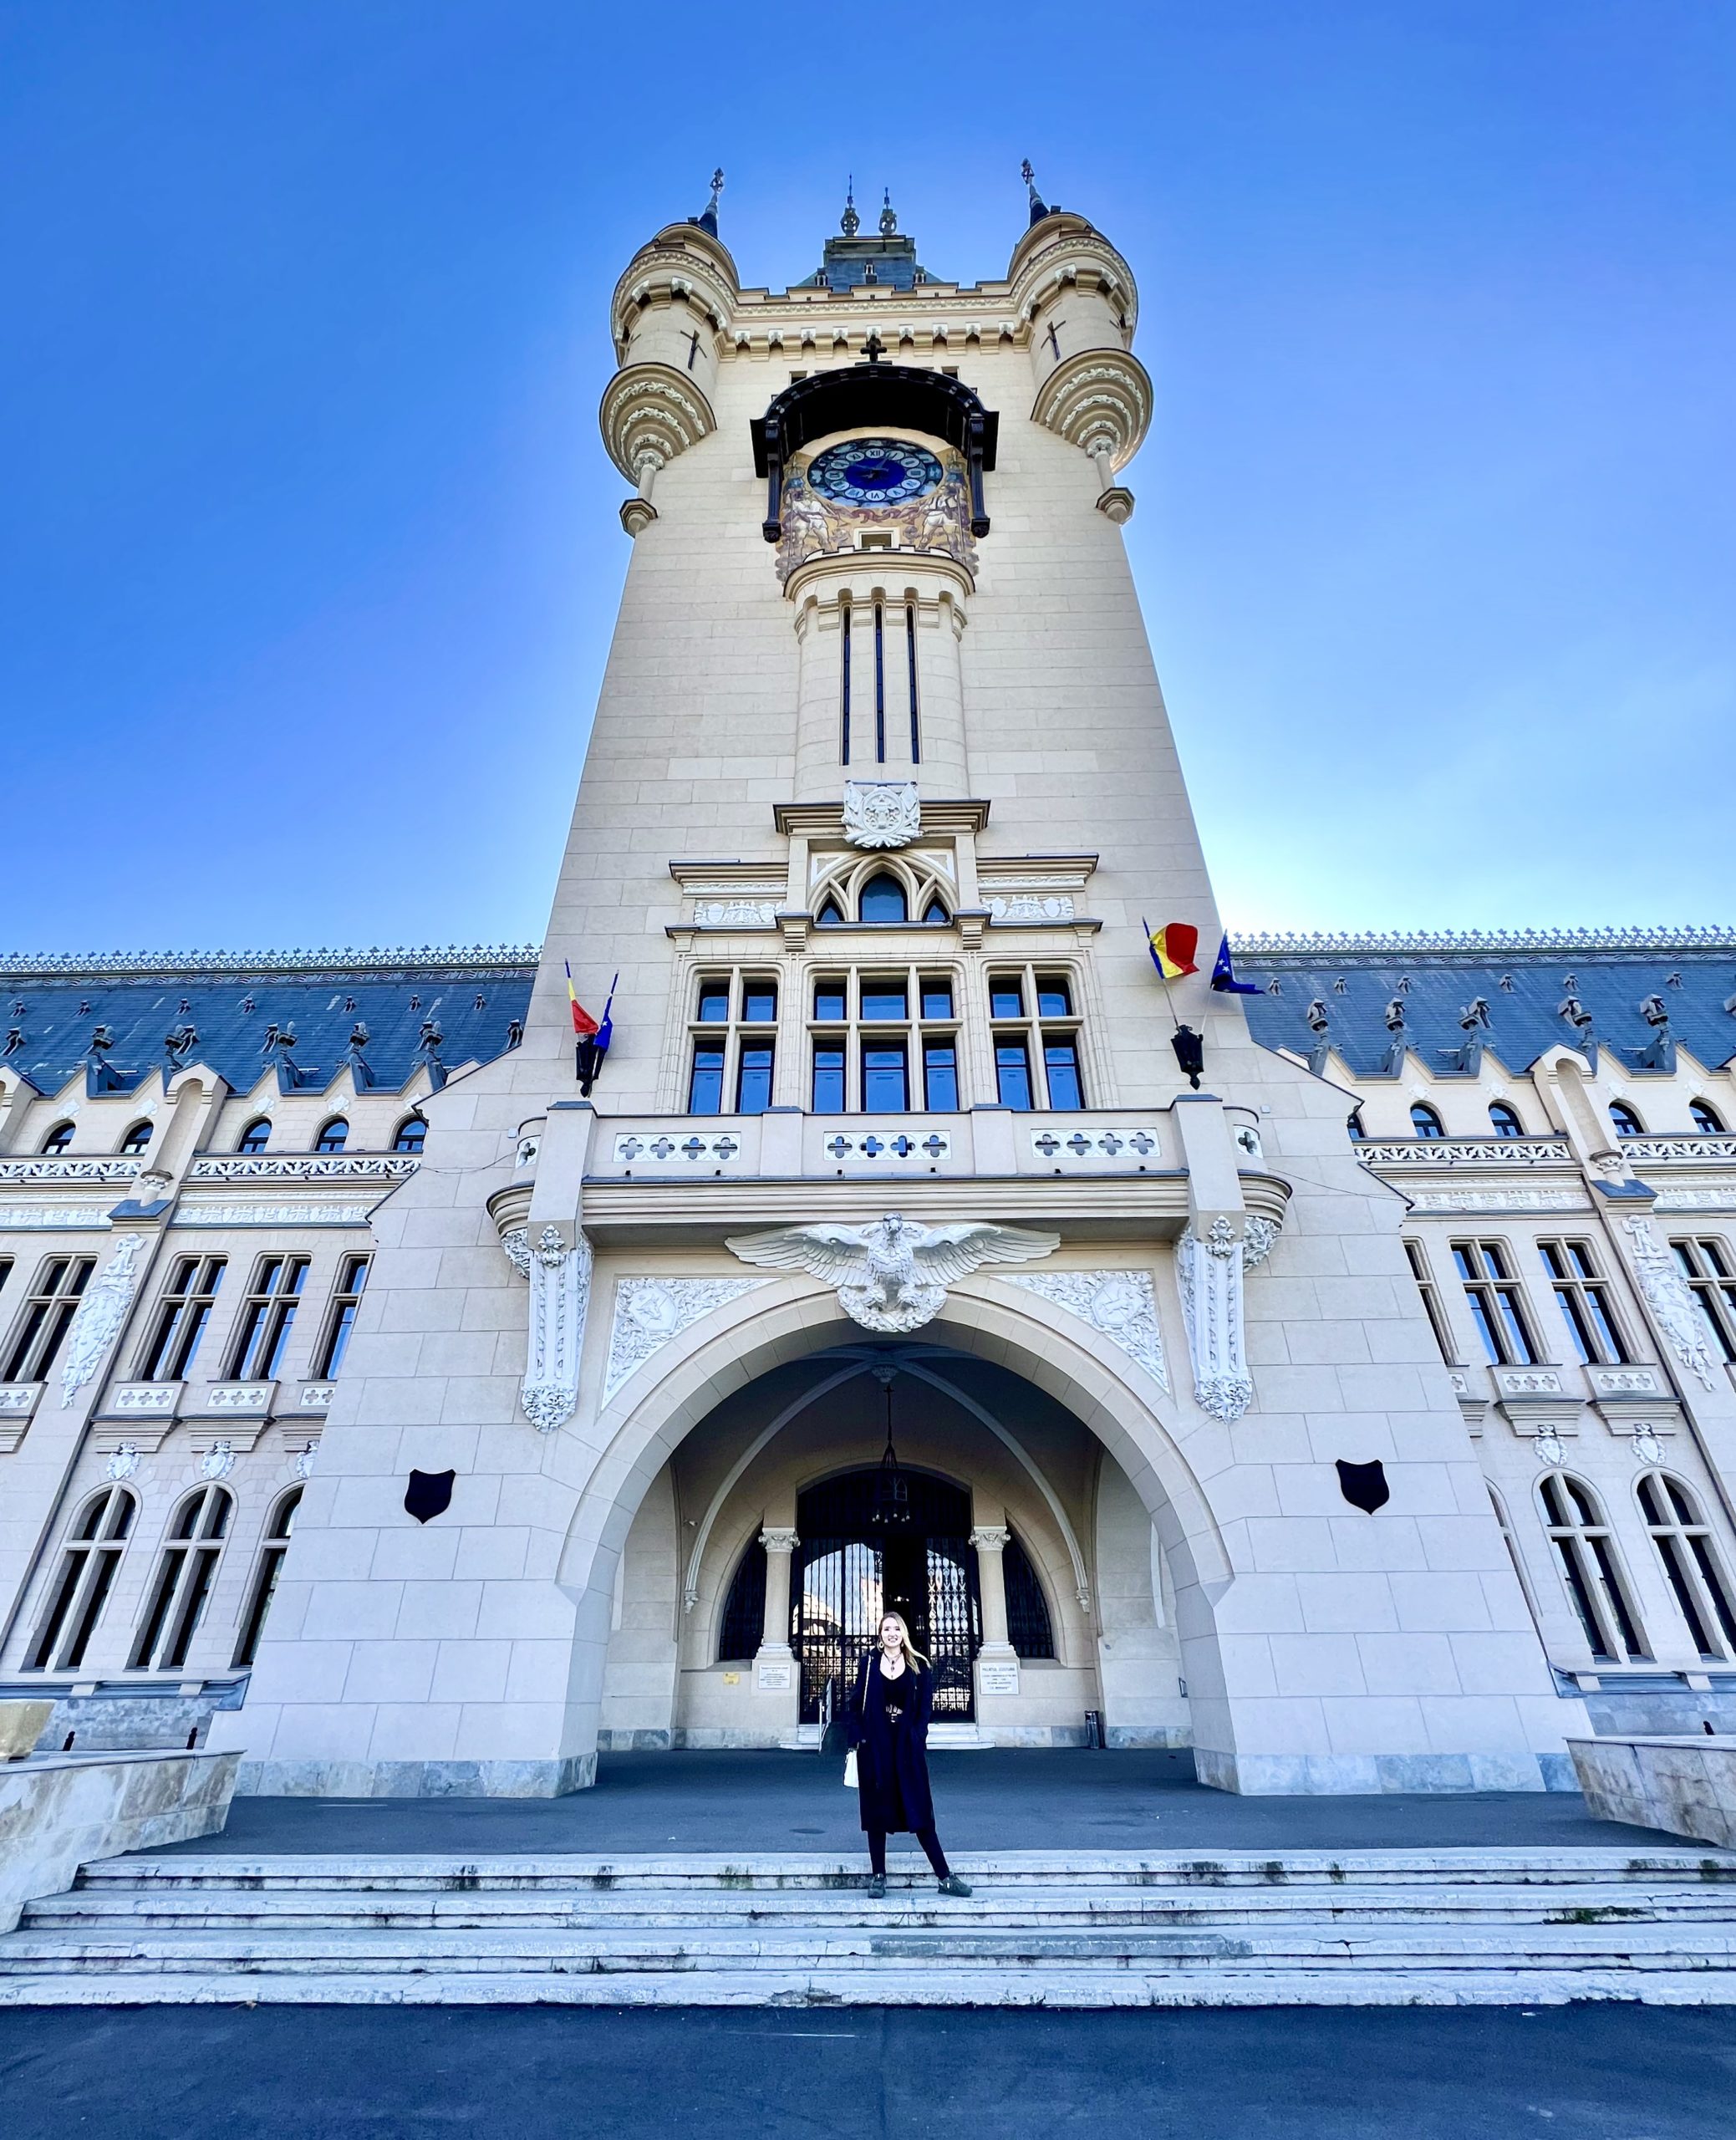 Palace of Culture, Iasi, Romania - A magnificent architectural landmark, the Palace of Culture in Iasi showcases stunning craftsmanship and cultural heritage, offering a glimpse into the city's rich history and artistic legacy.